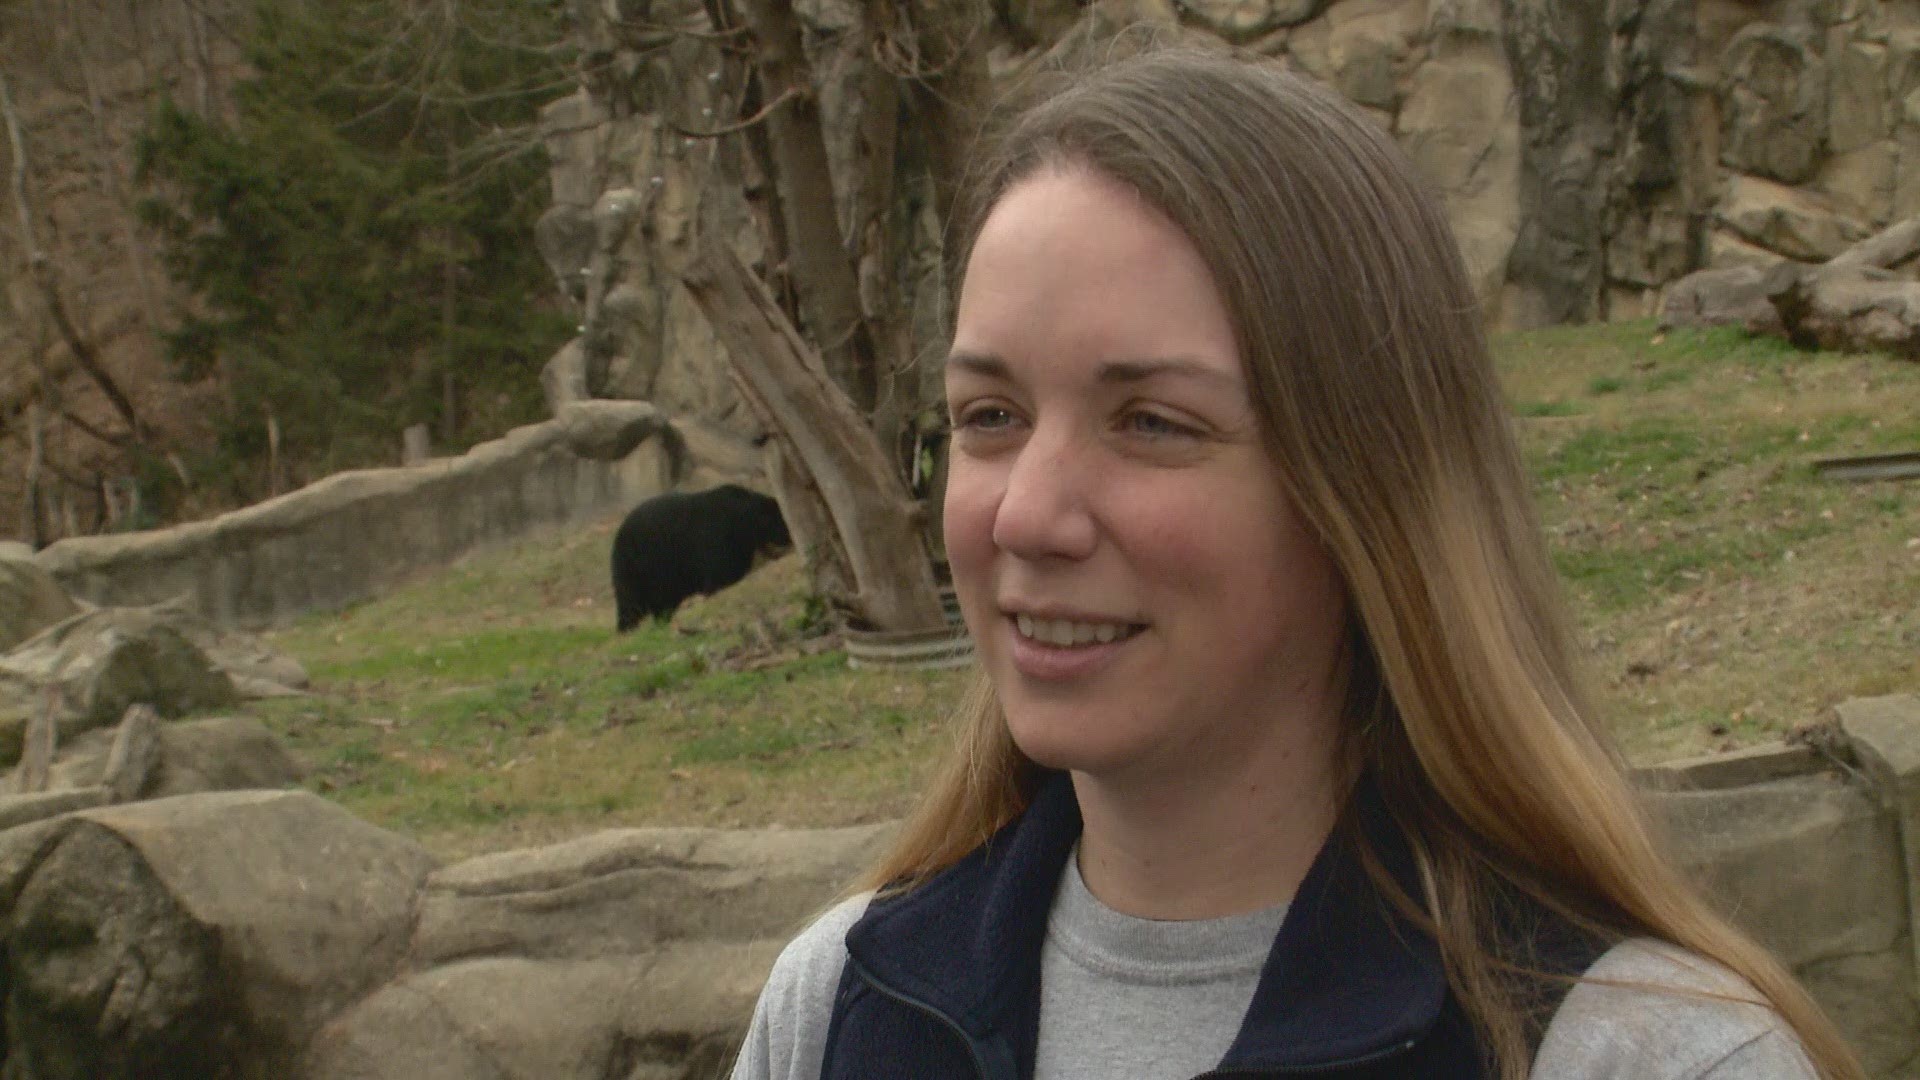 Zookeeper Sara Colandrea shares how the zoo prepares bears Billie Jean and Quito for breeding and reproduction.